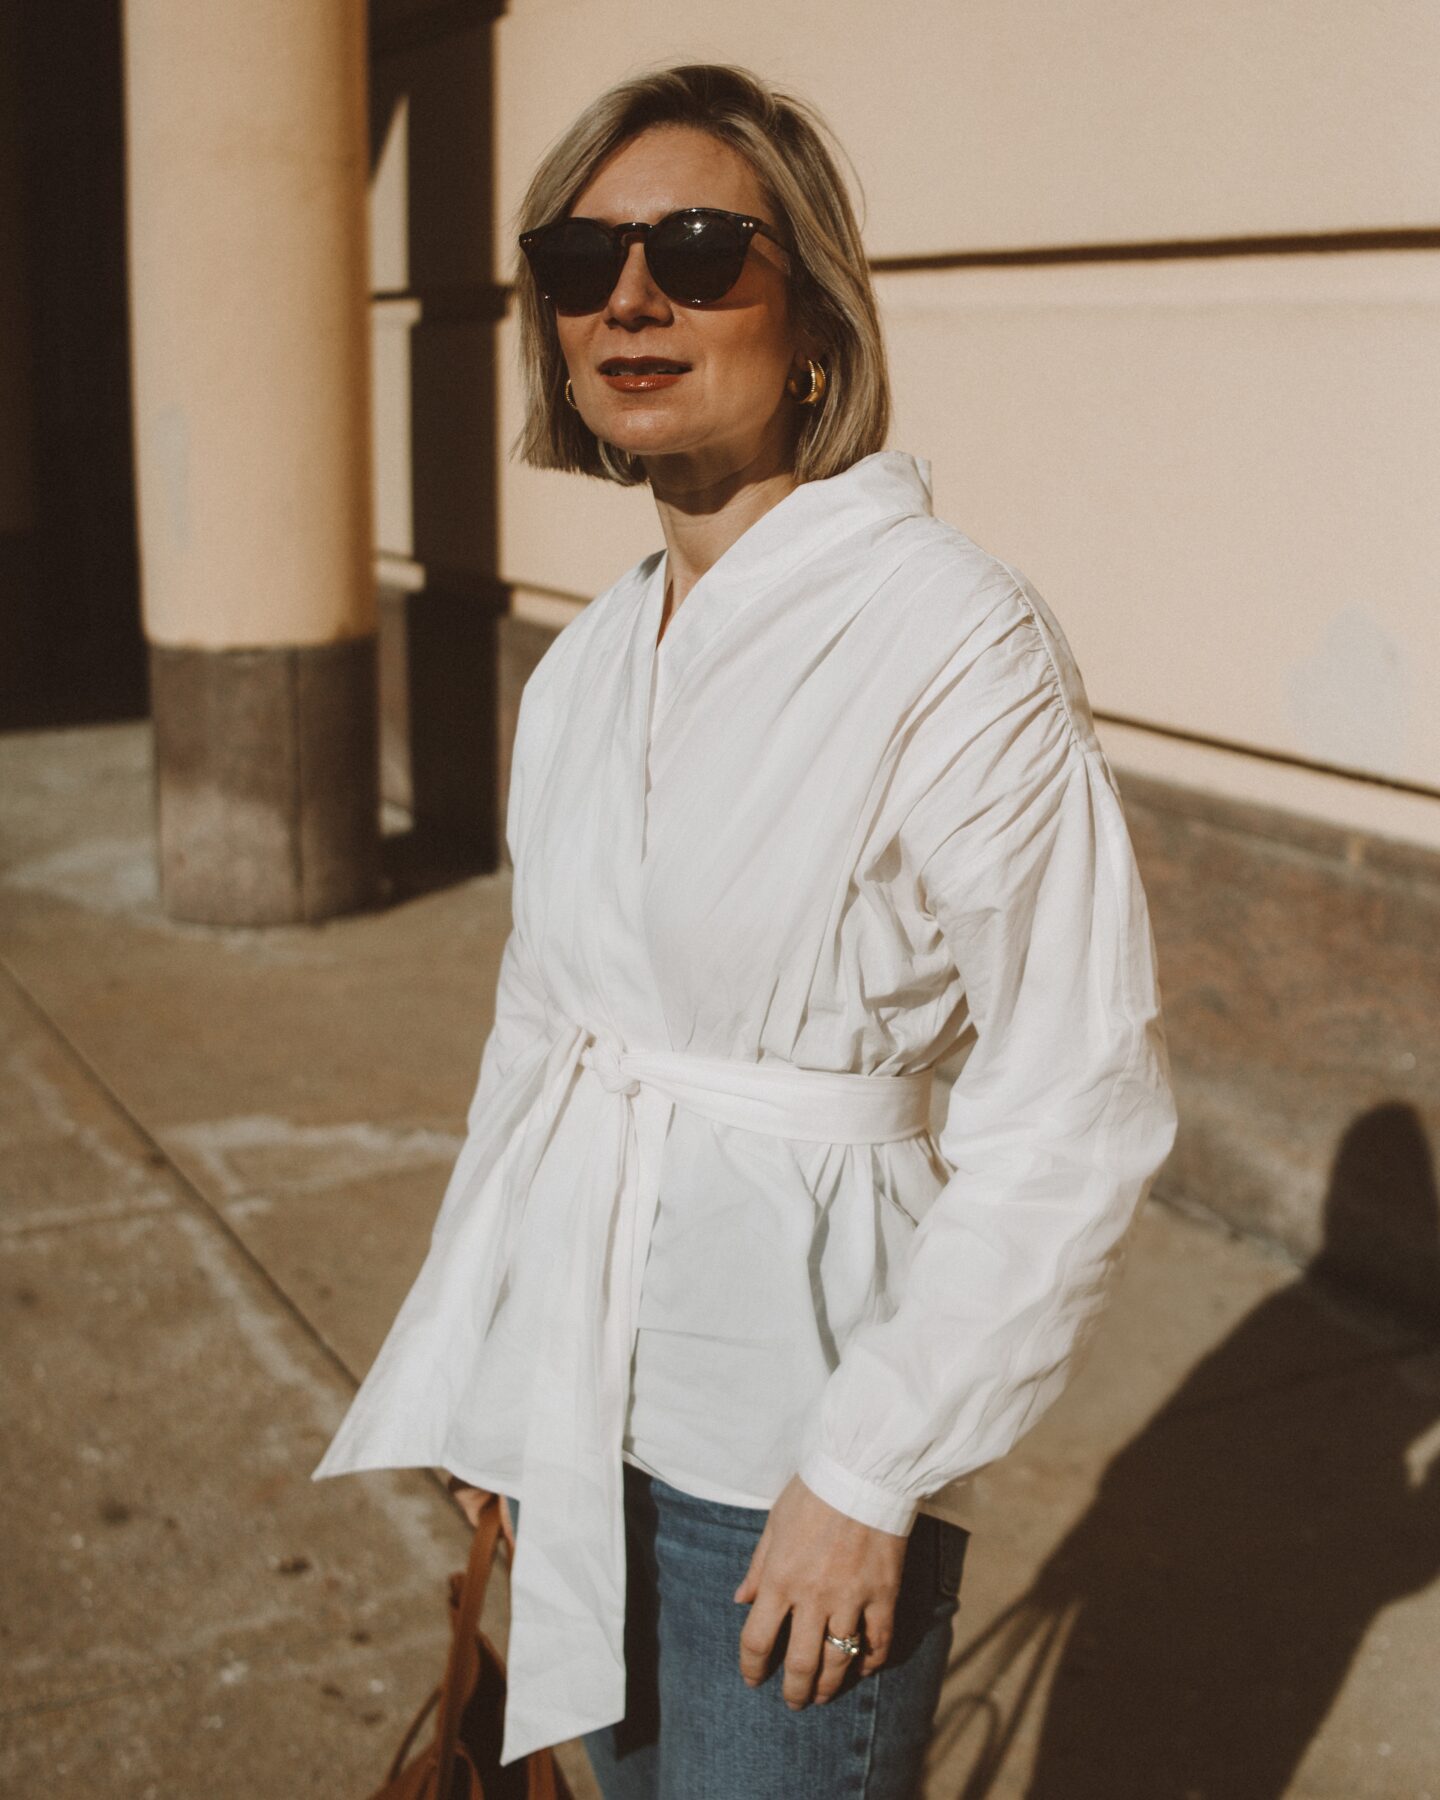 Karin Emily wears a white cotton wrap blouse with a pair of classic tortoiseshell sunglasses